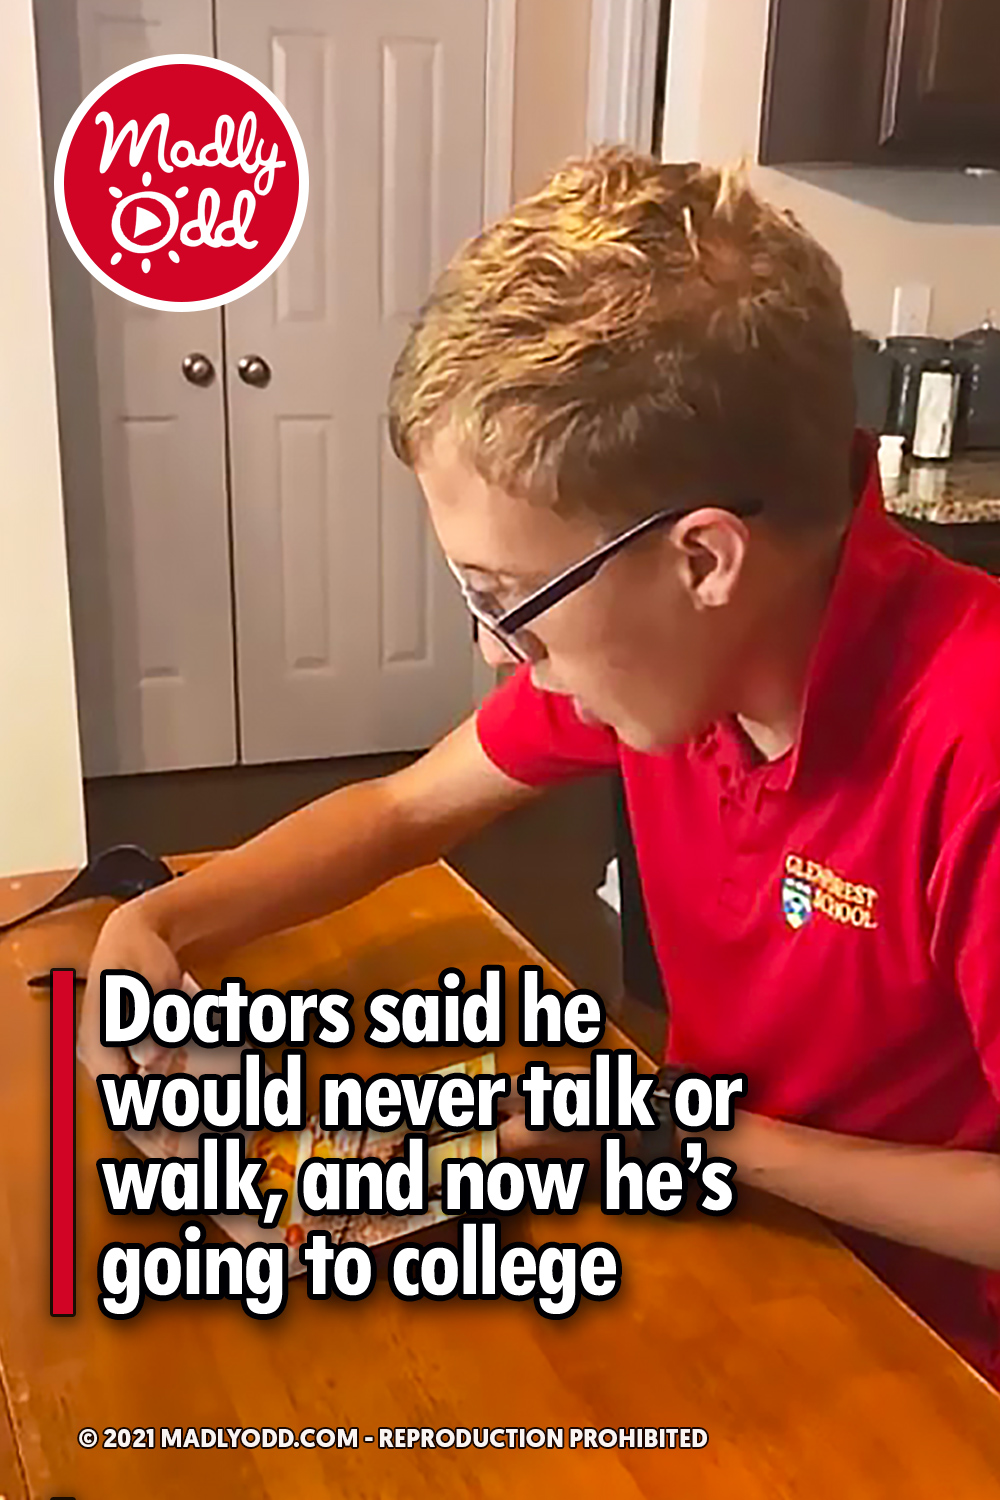 Doctors said he would never talk or walk, and now he’s going to college